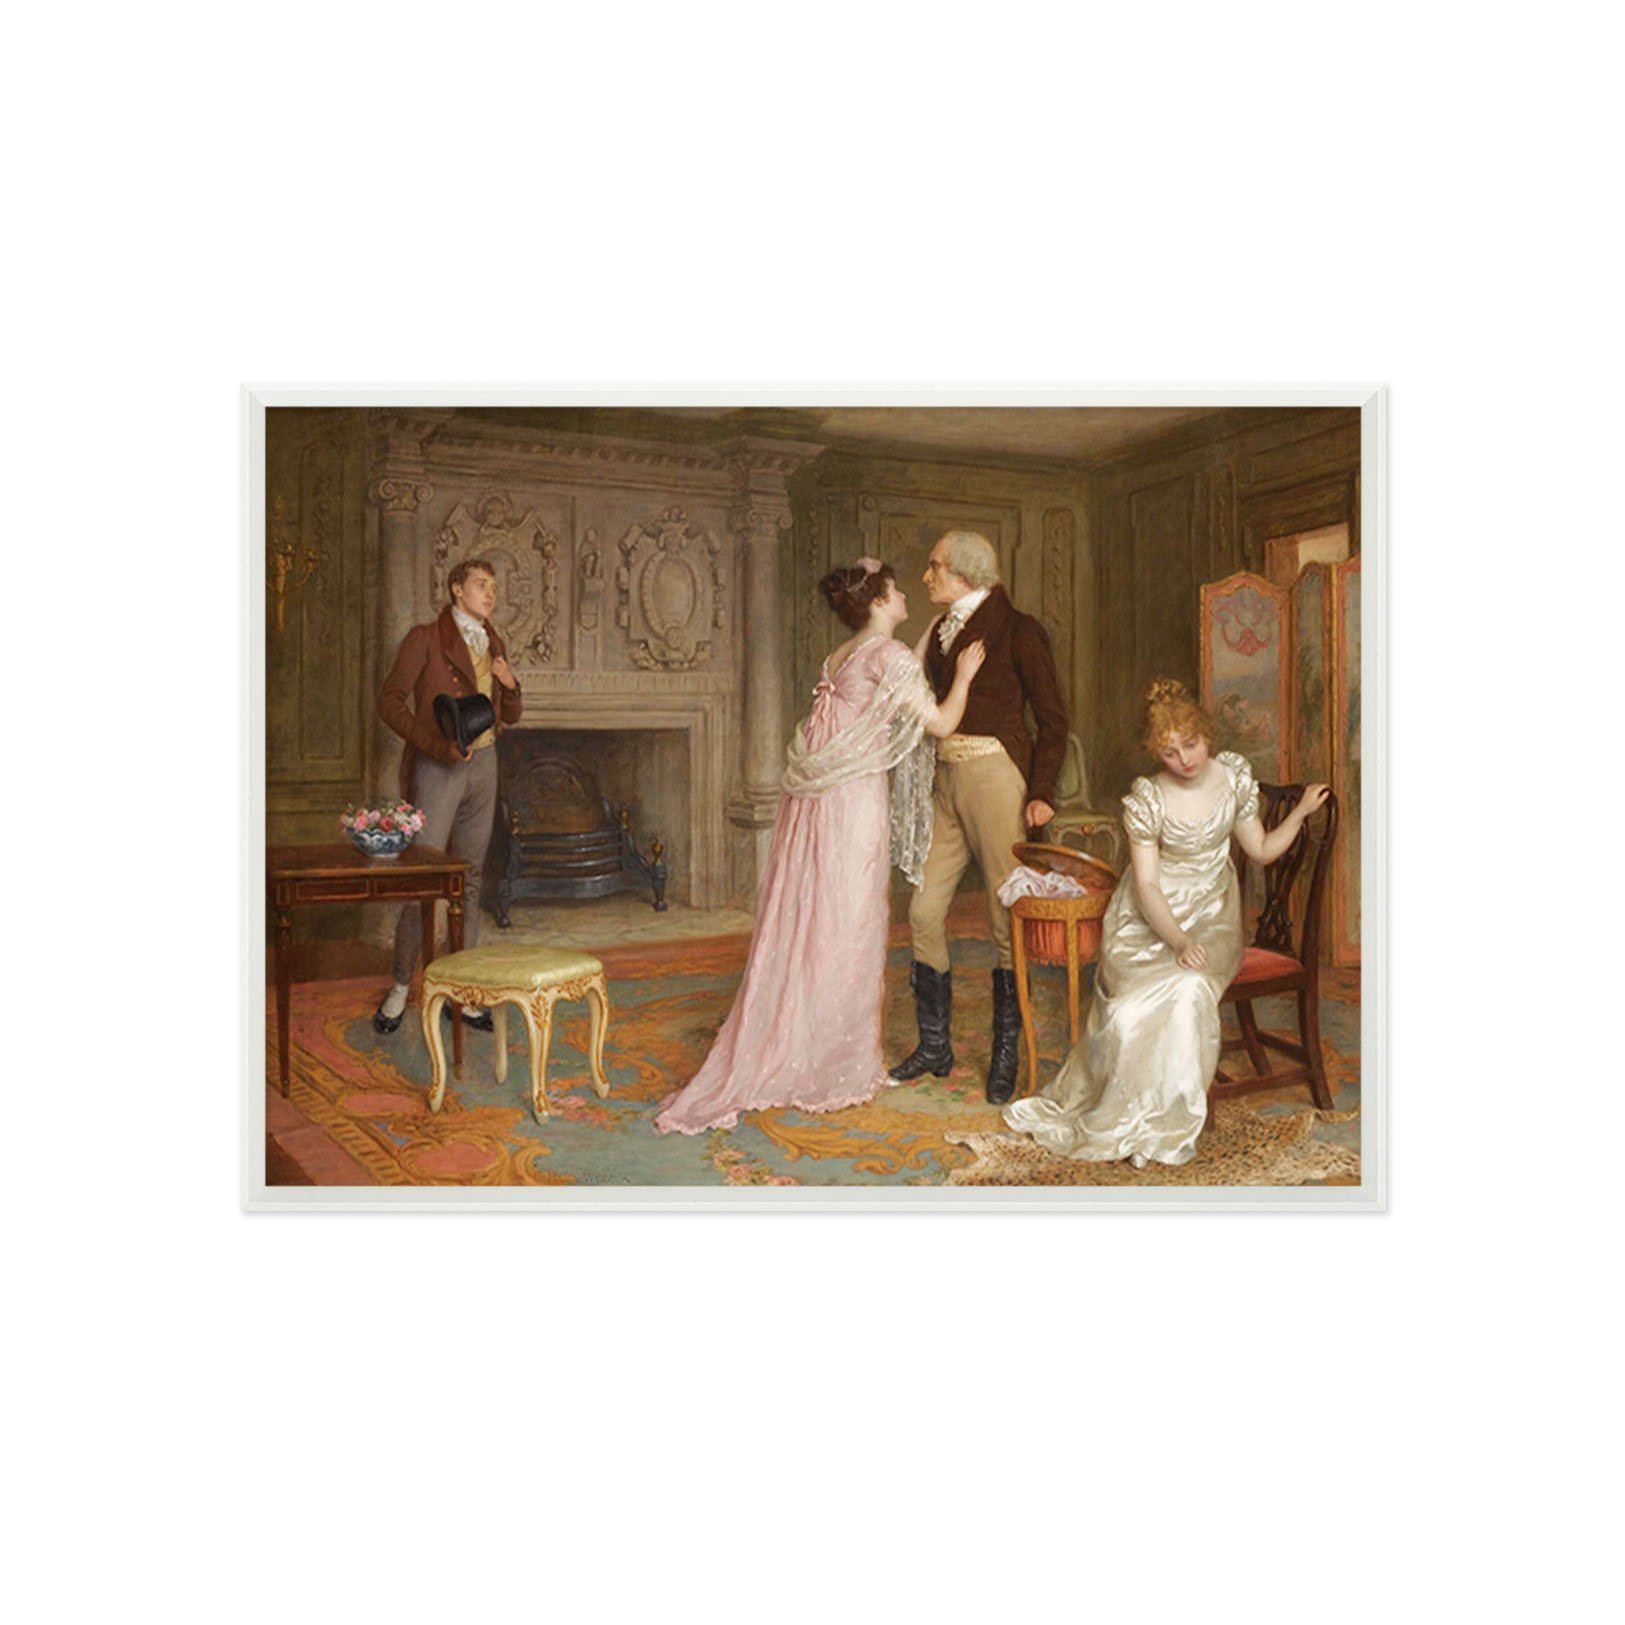 3D Reluctantly Parting 049 Fake Framed Print Painting Wallpaper AJ Creativity Home 